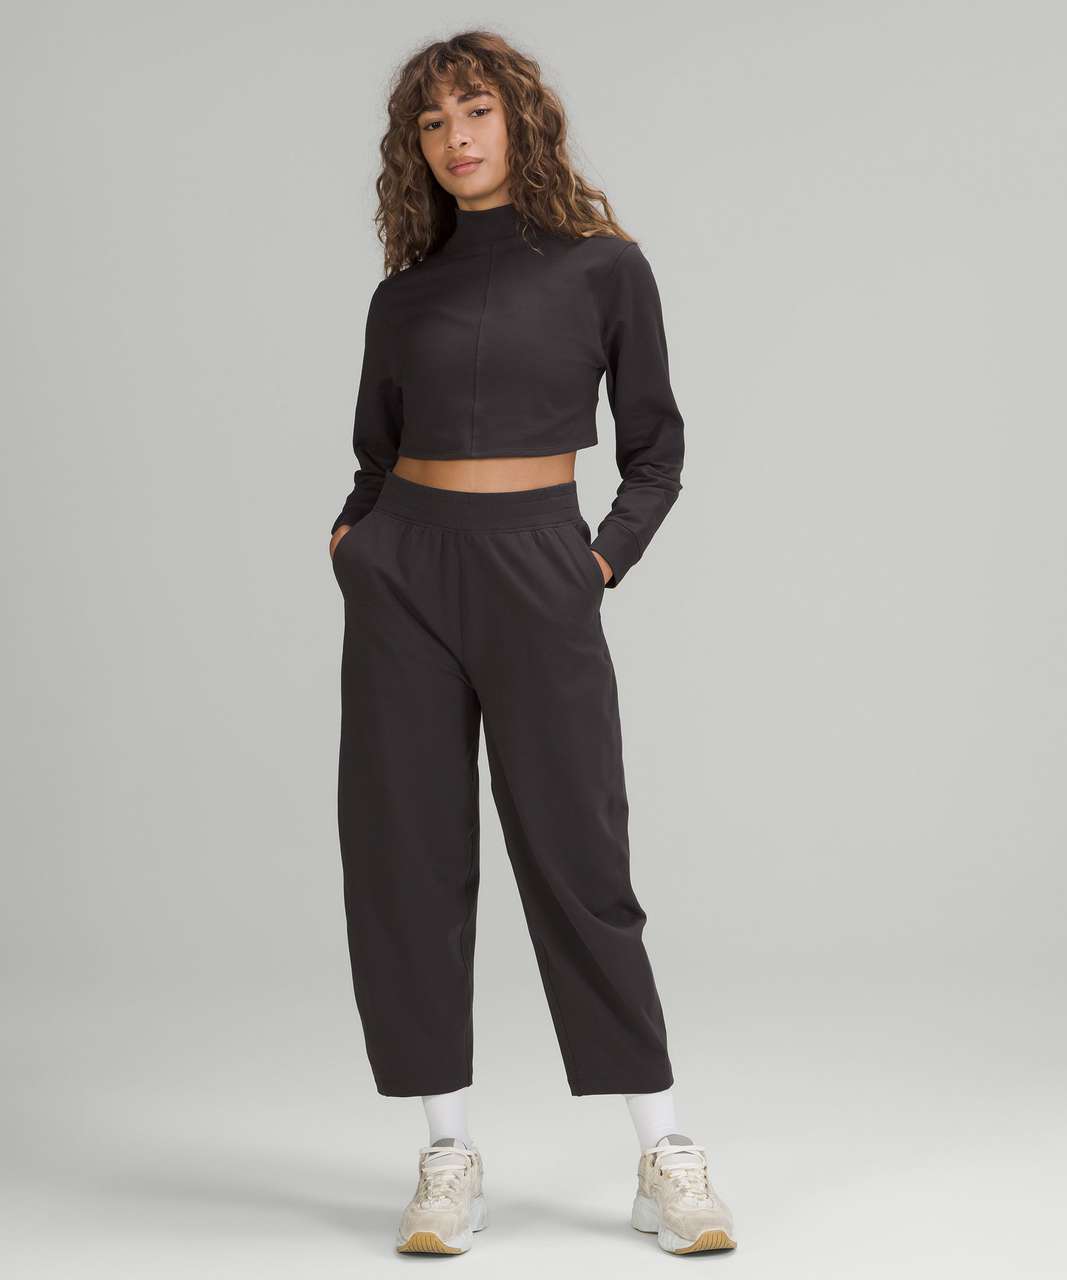 LA Open back mock neck LS in black granite (10) paired with groove pants  (8) and Free to be serene Brown earth camo (10) : r/lululemon